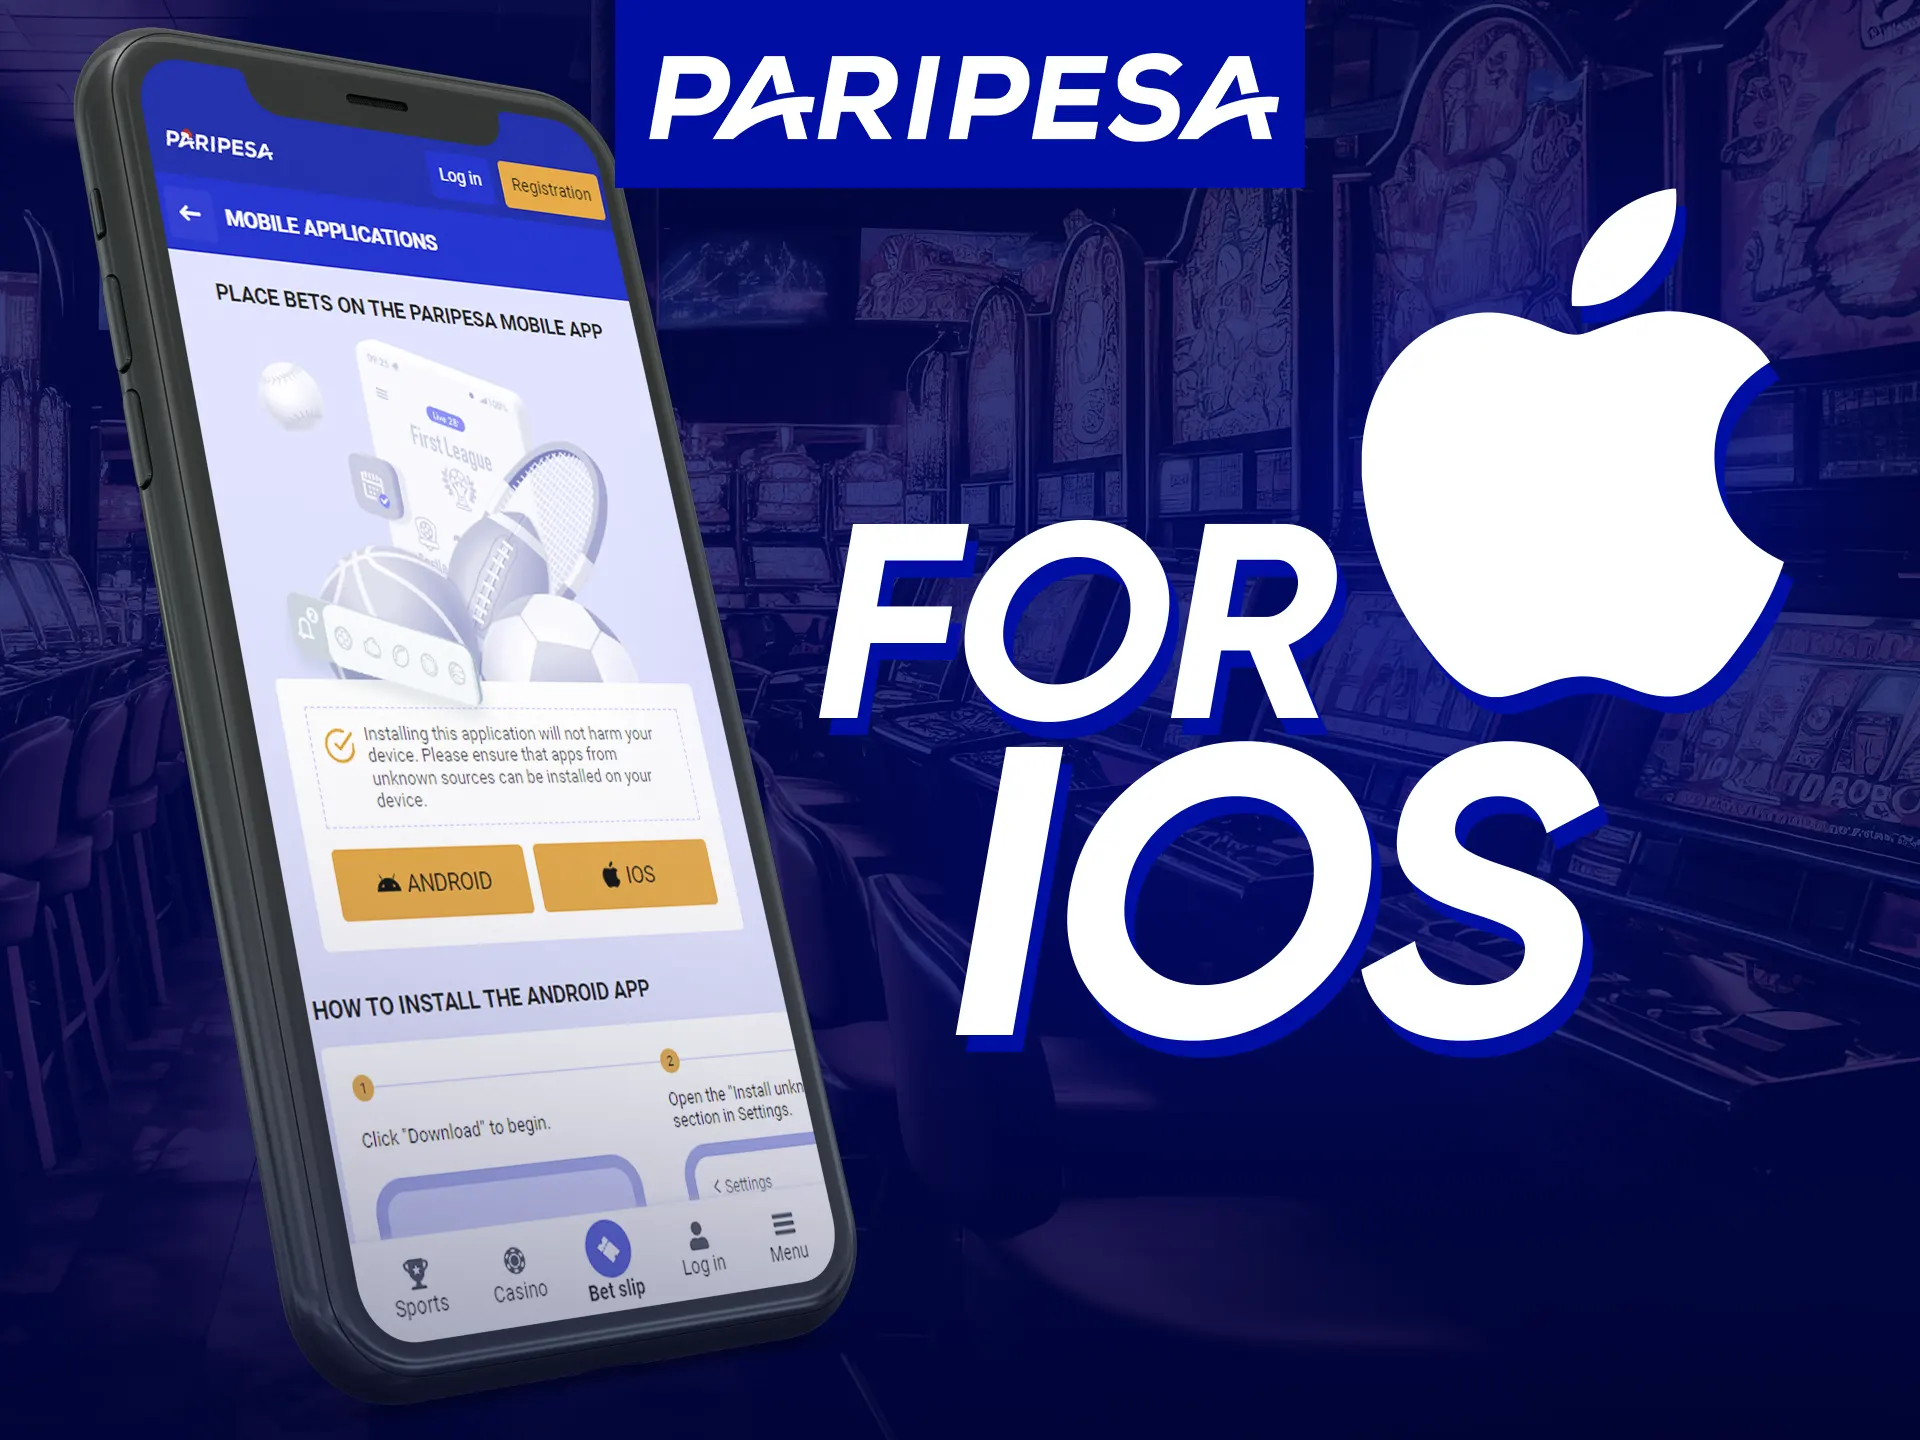 For iOS visit the App Store, log in, choose Nigeria, agree and install Paripesa app.